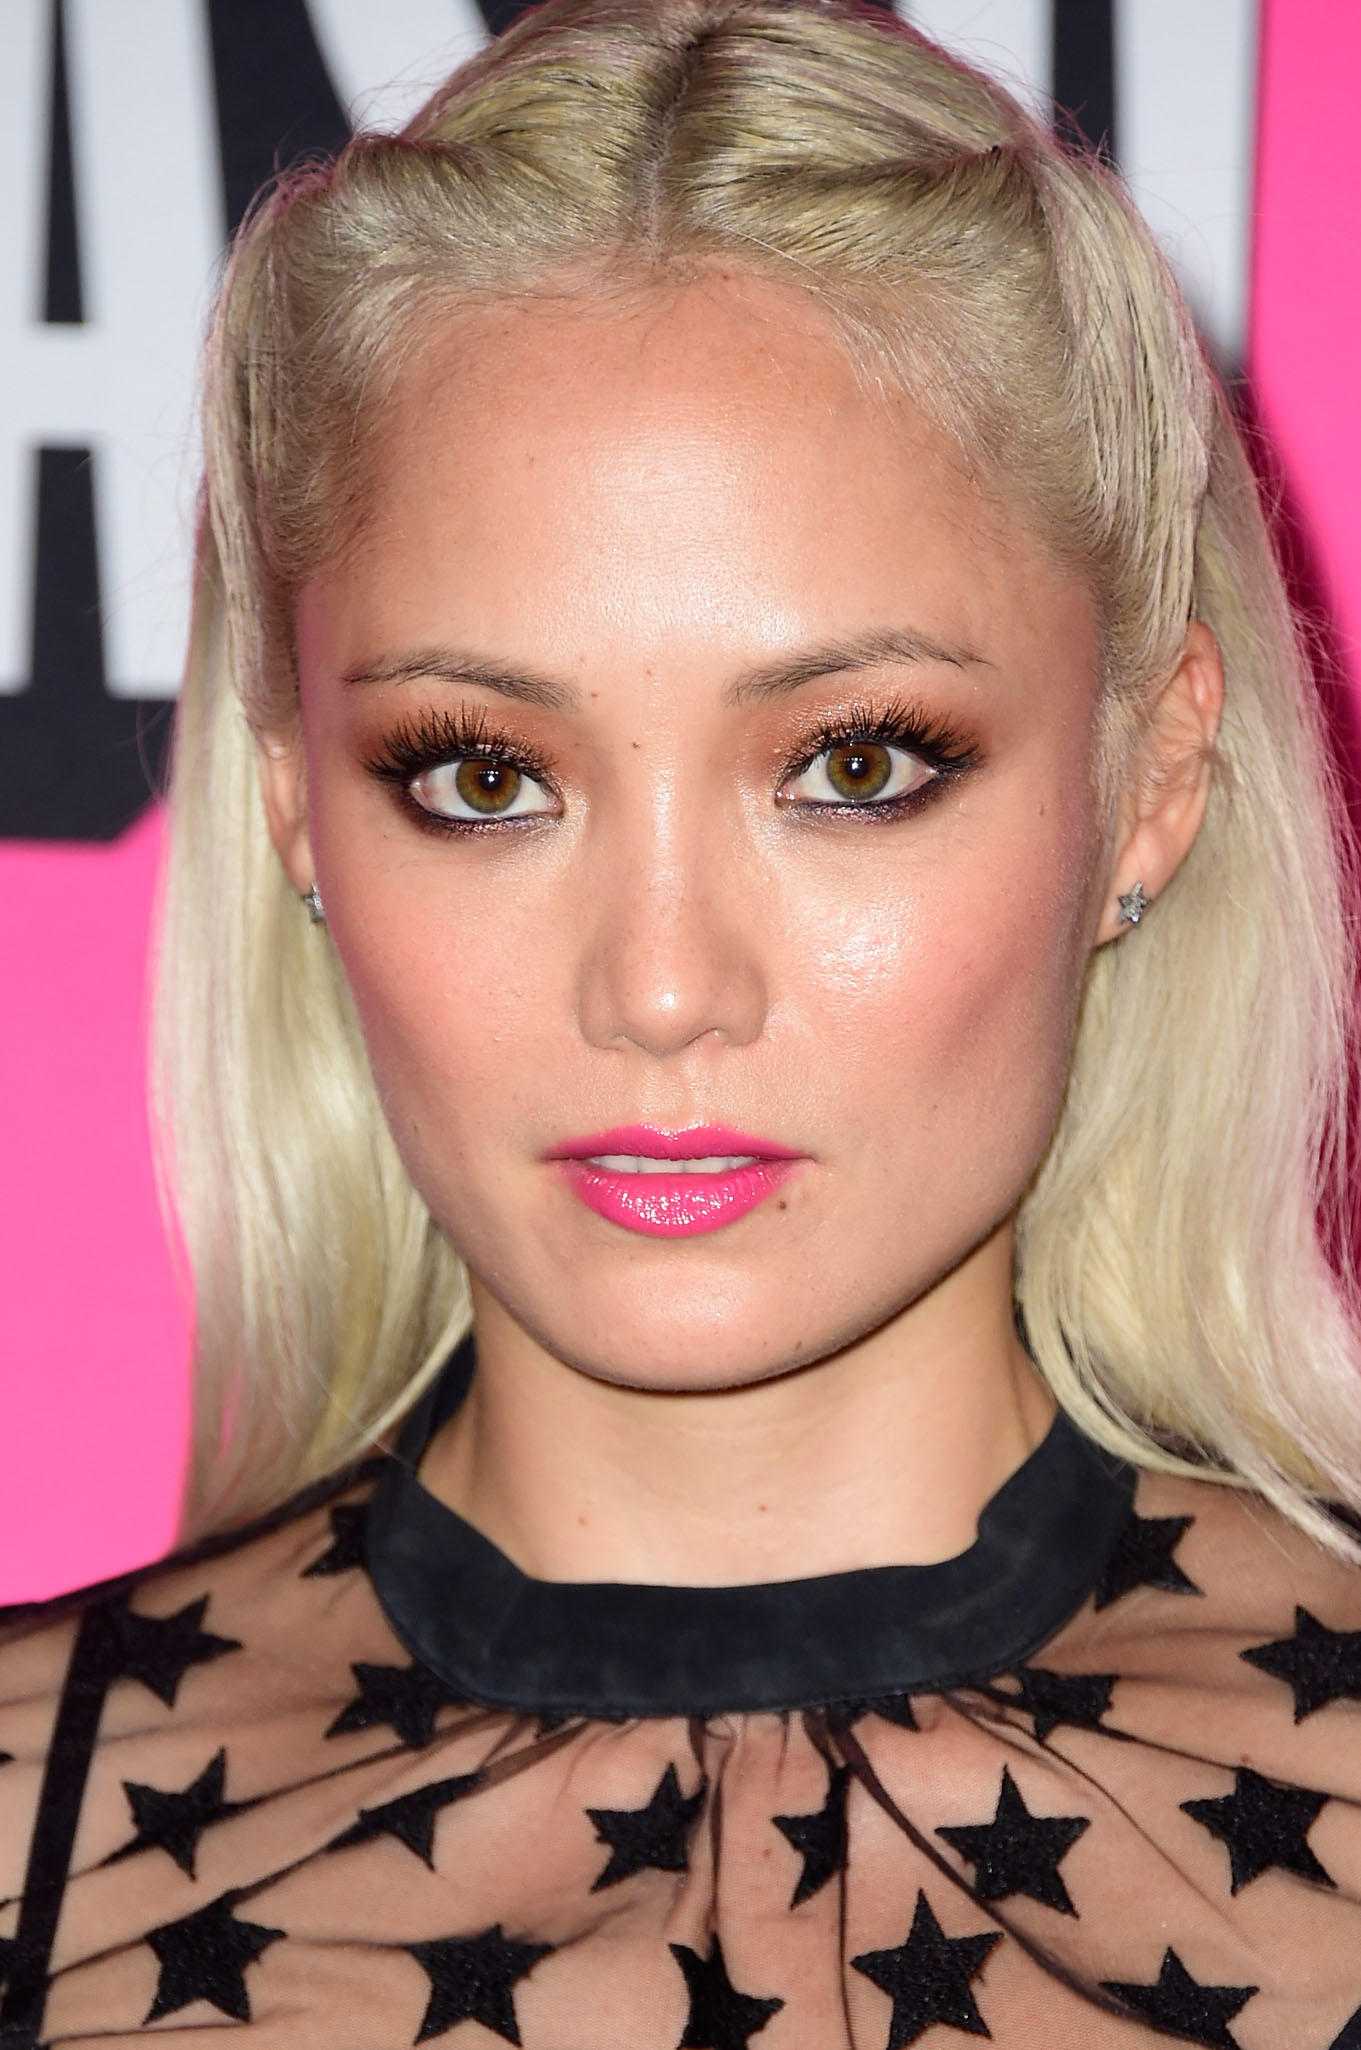 70+ Hot Pictures Of Pom Klementieff Who Plays Mantis In Marvel Cinematic Universe 120